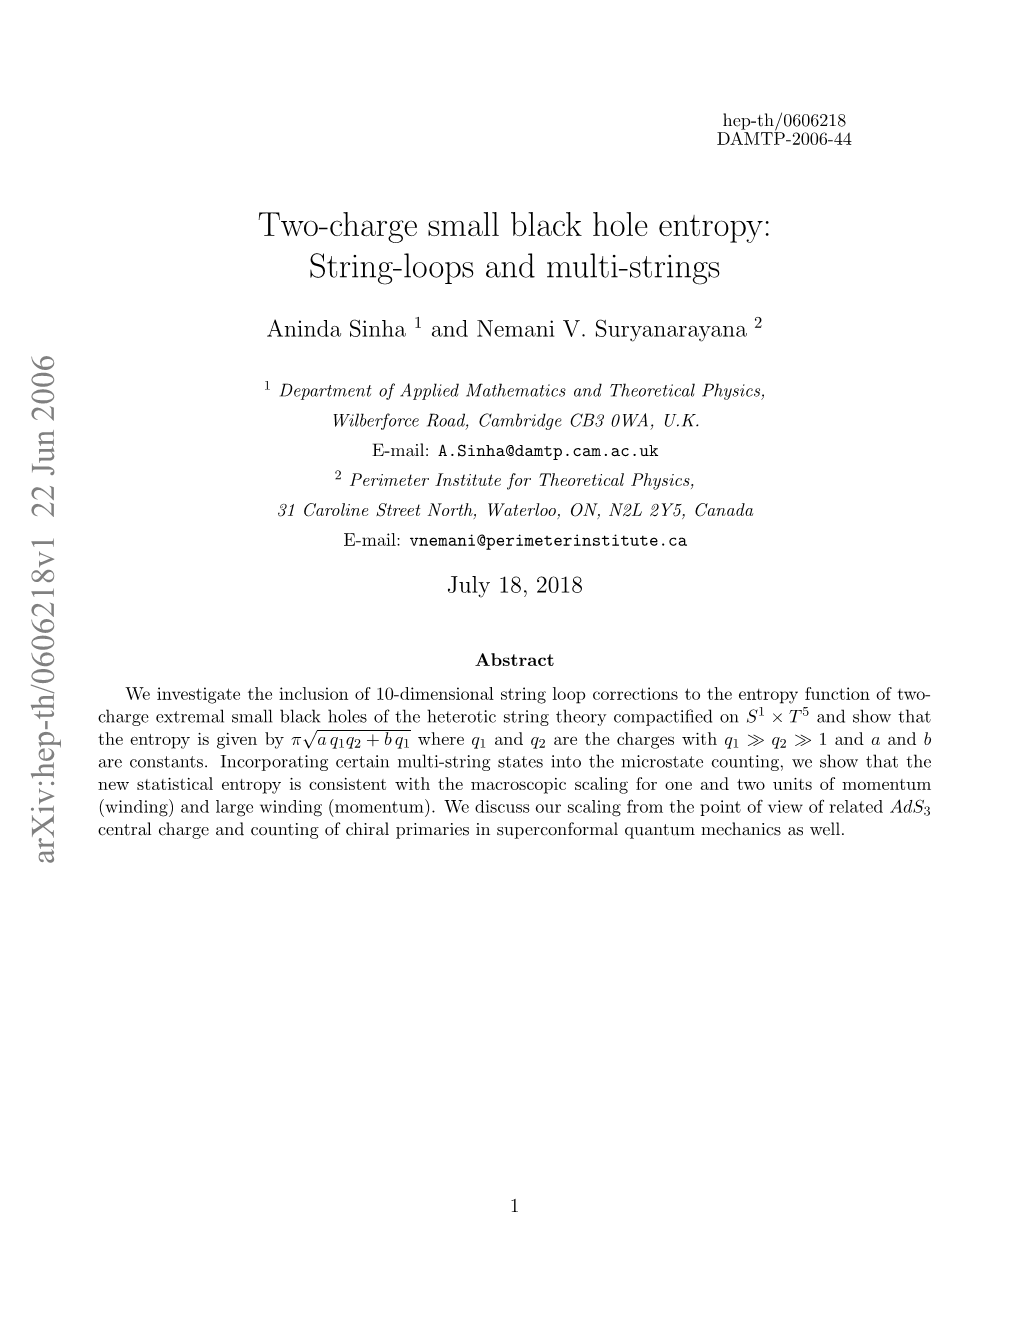 Two-Charge Small Black Hole Entropy: String-Loops and Multi-Strings